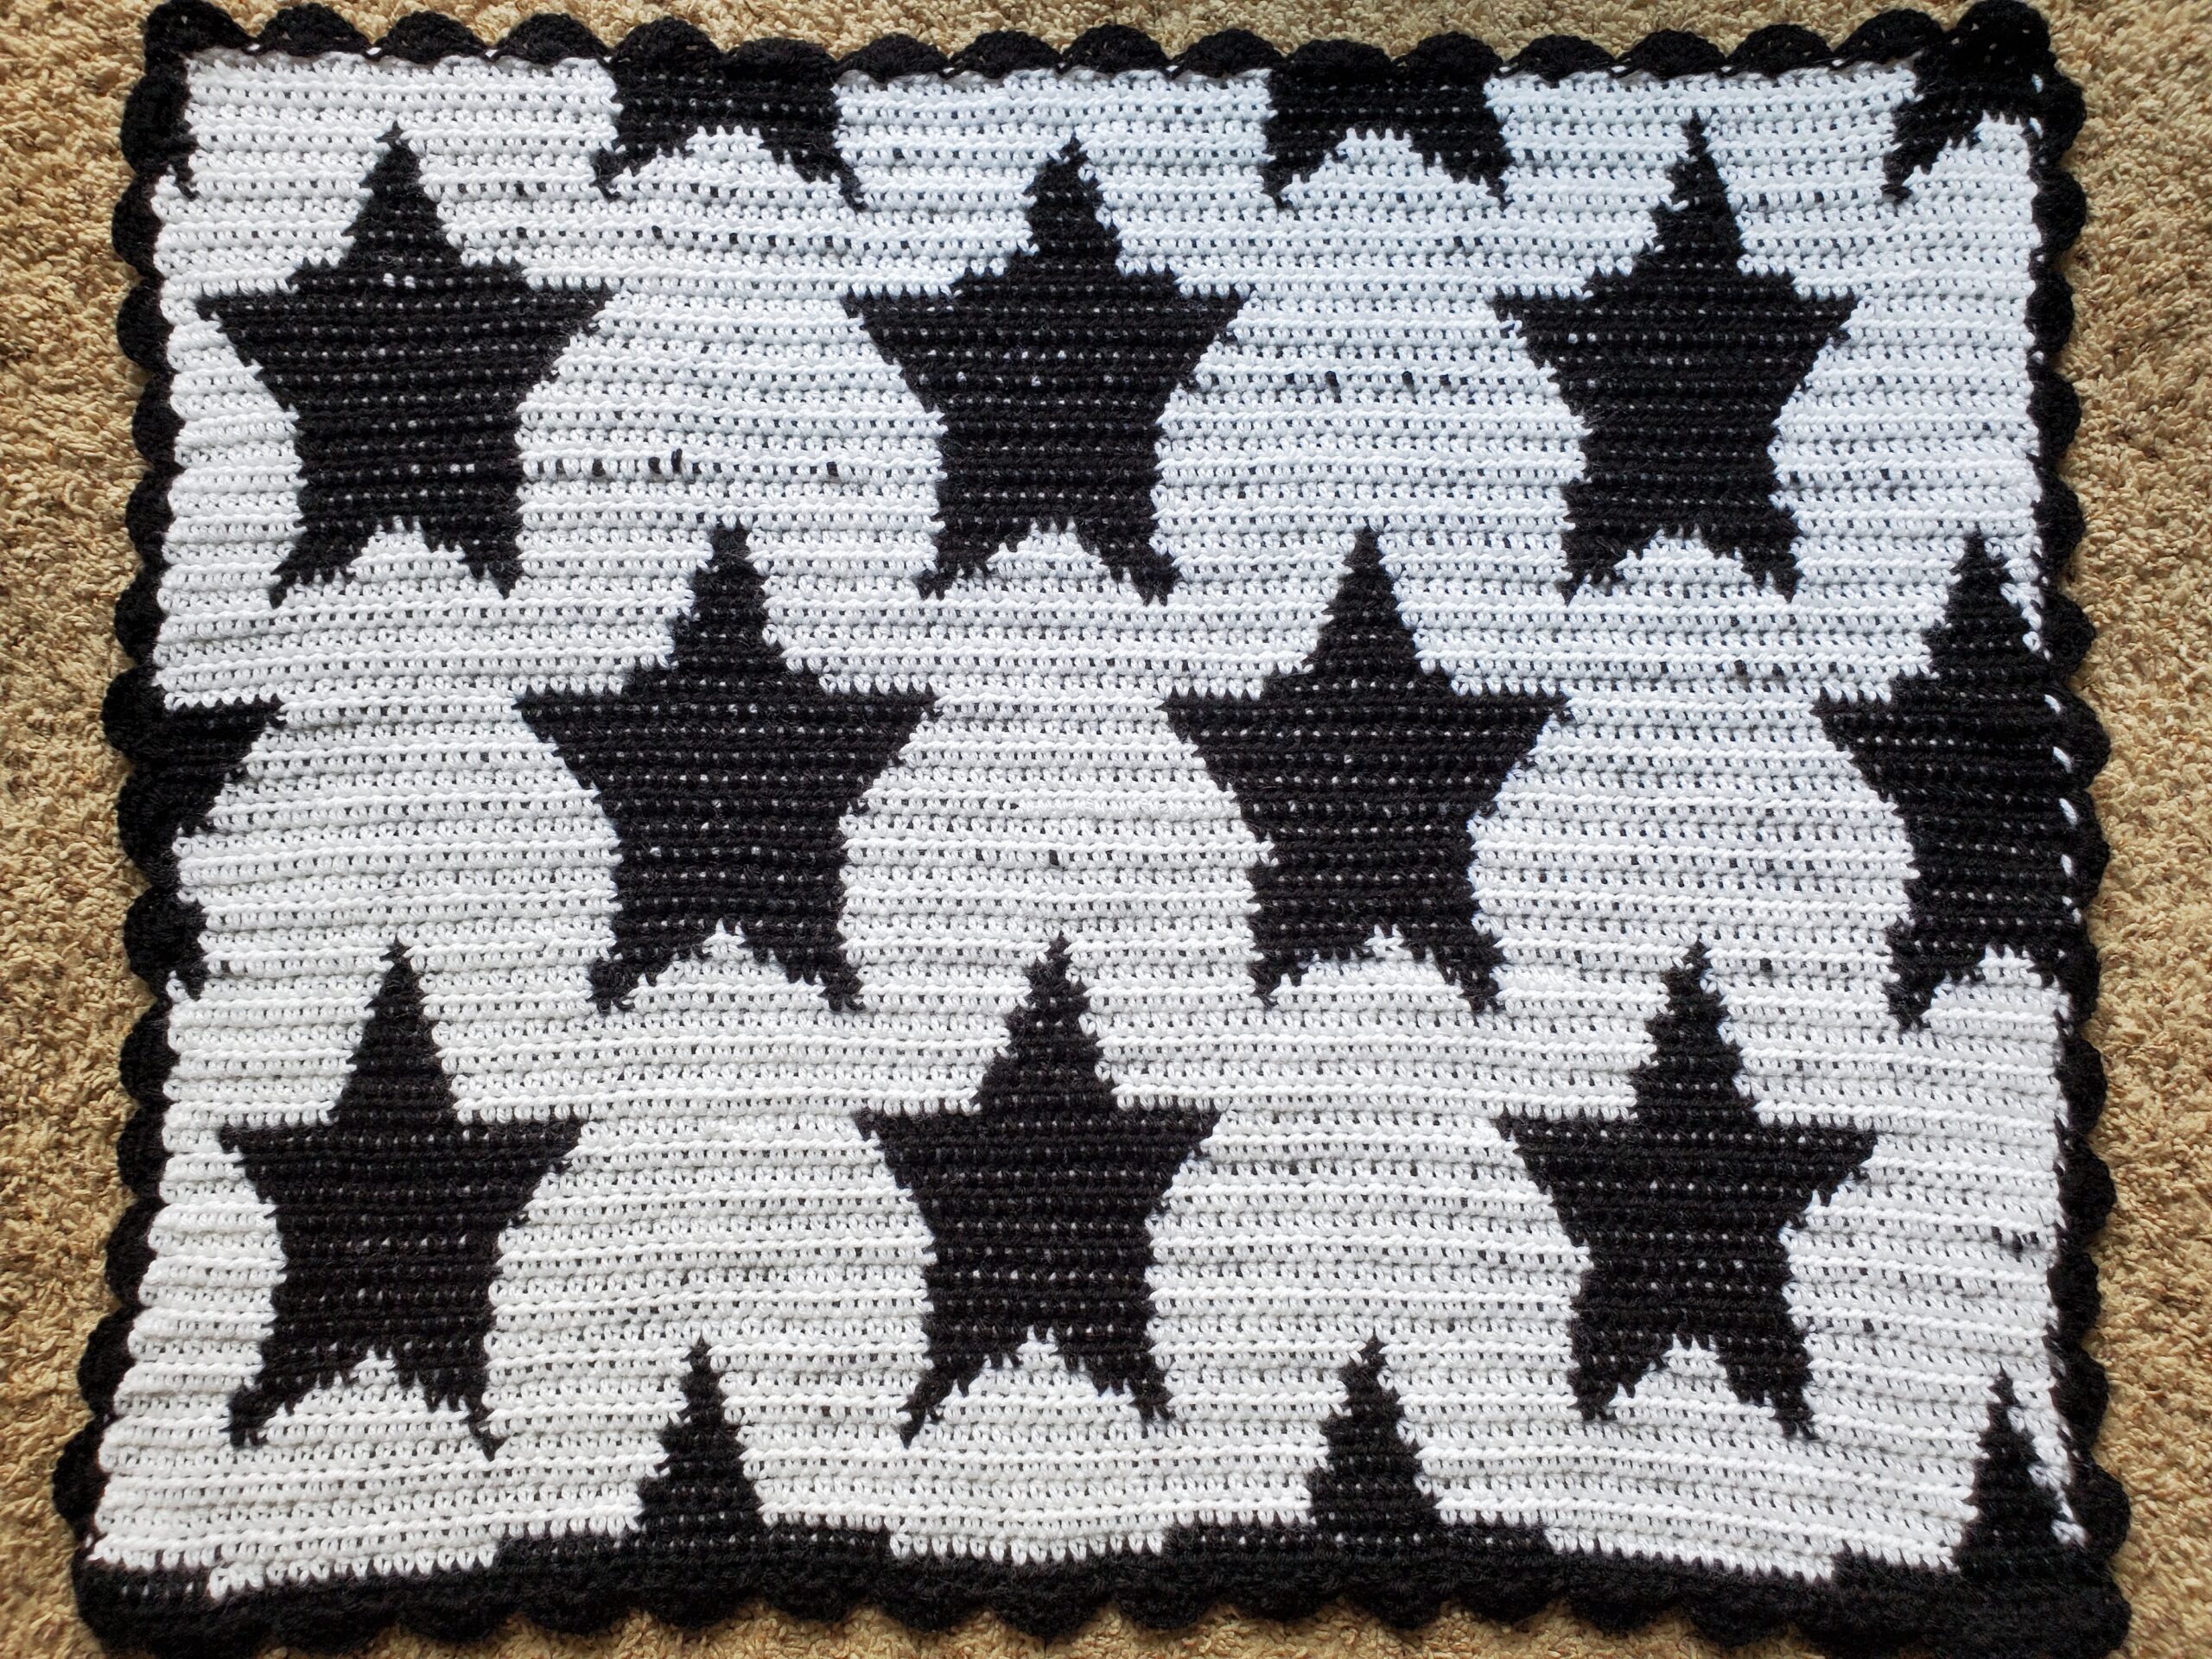 Completed black and white crochet baby blanket